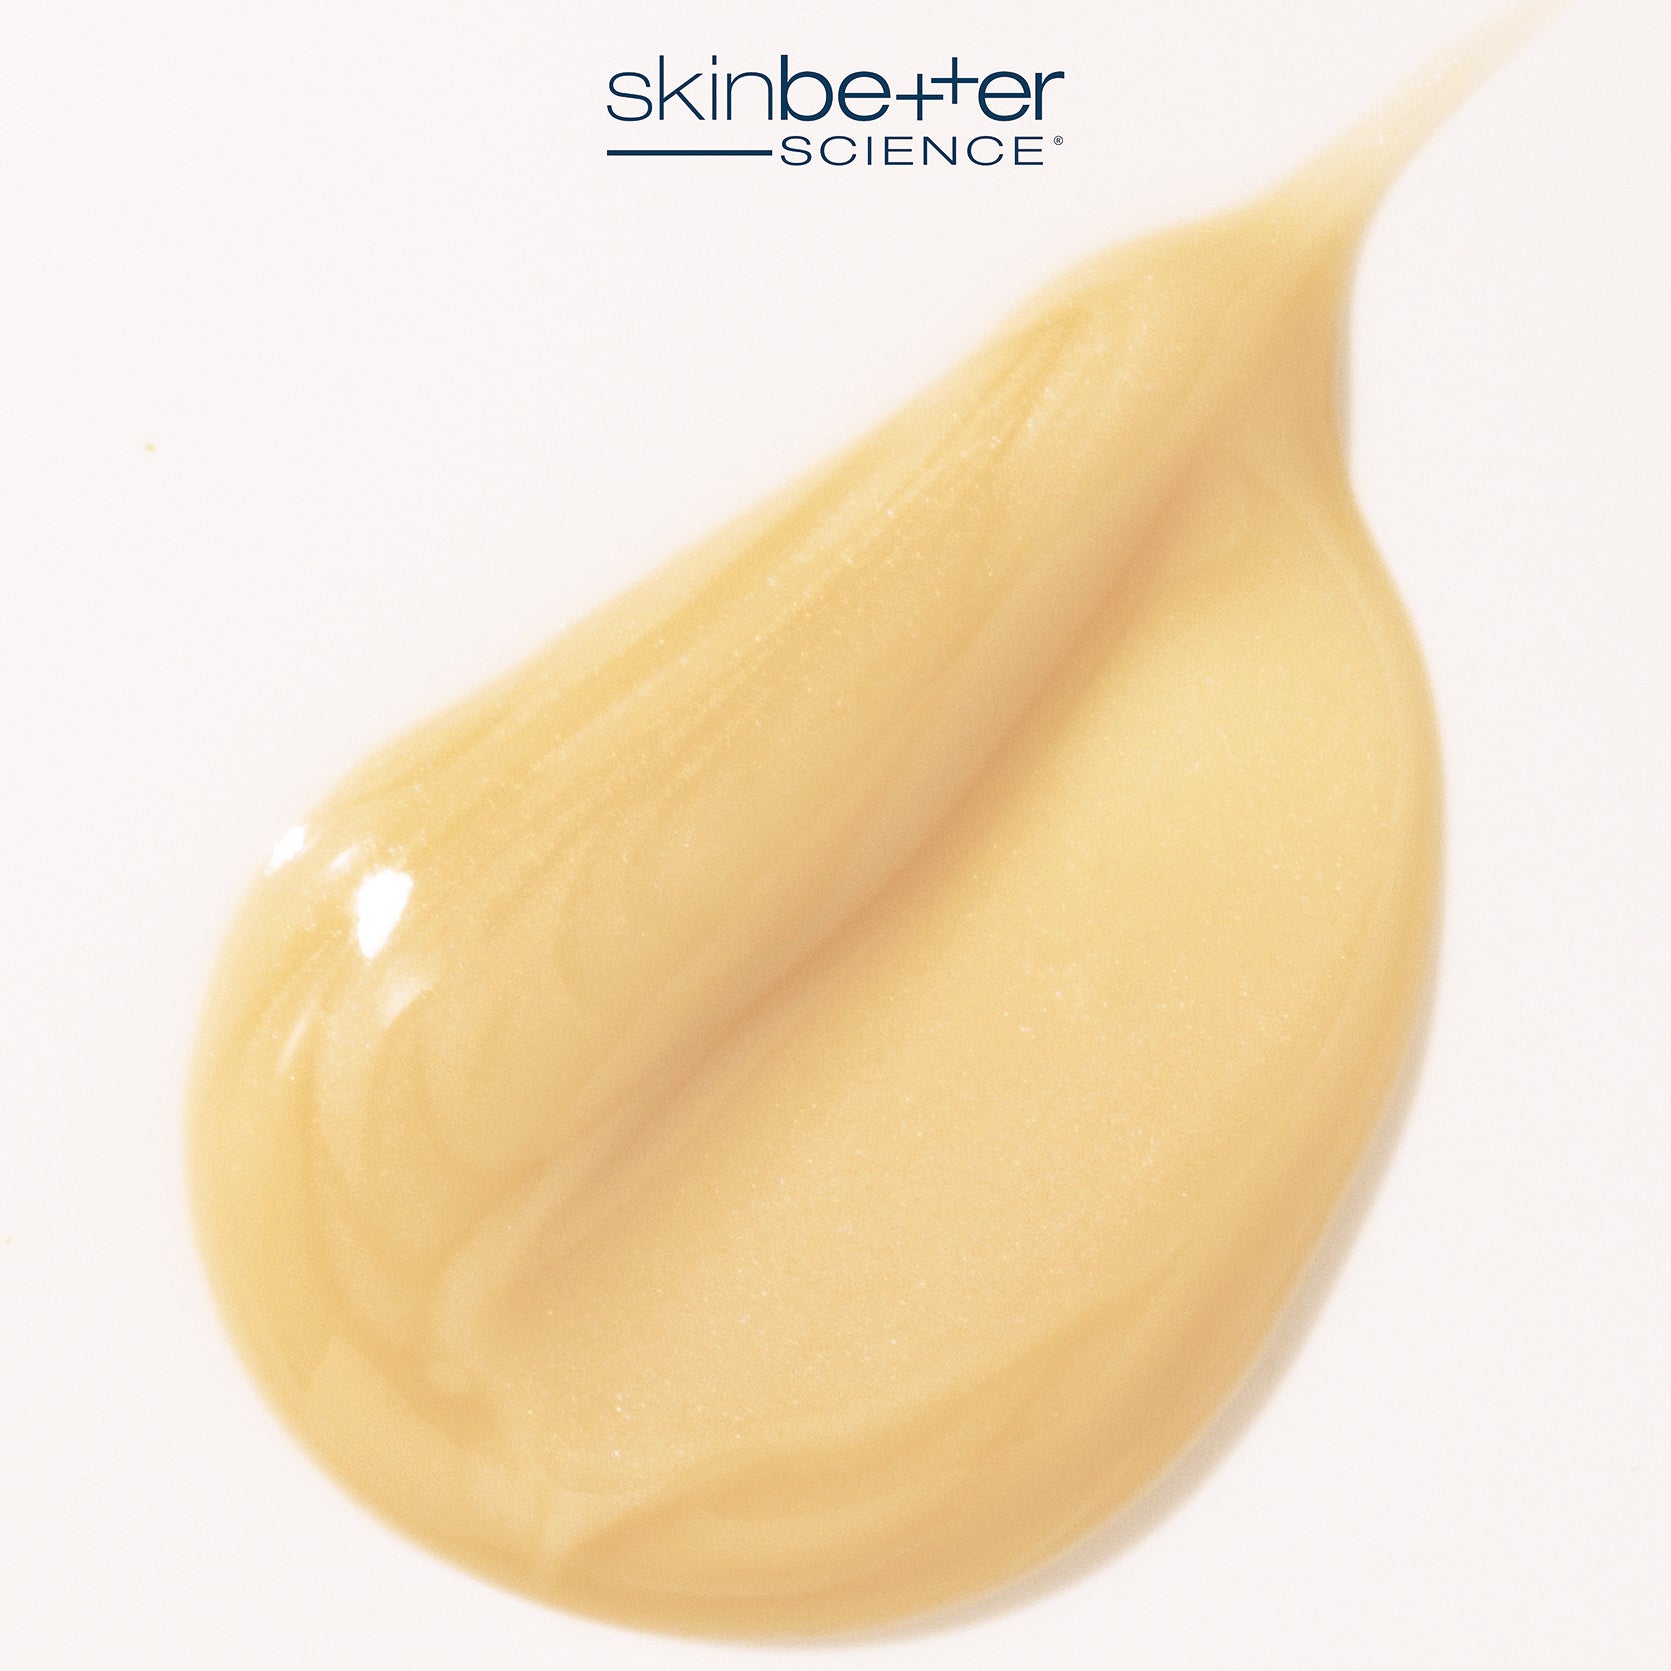 Skinbetter Science | InterFuse Treatment Cream FACE & NECK